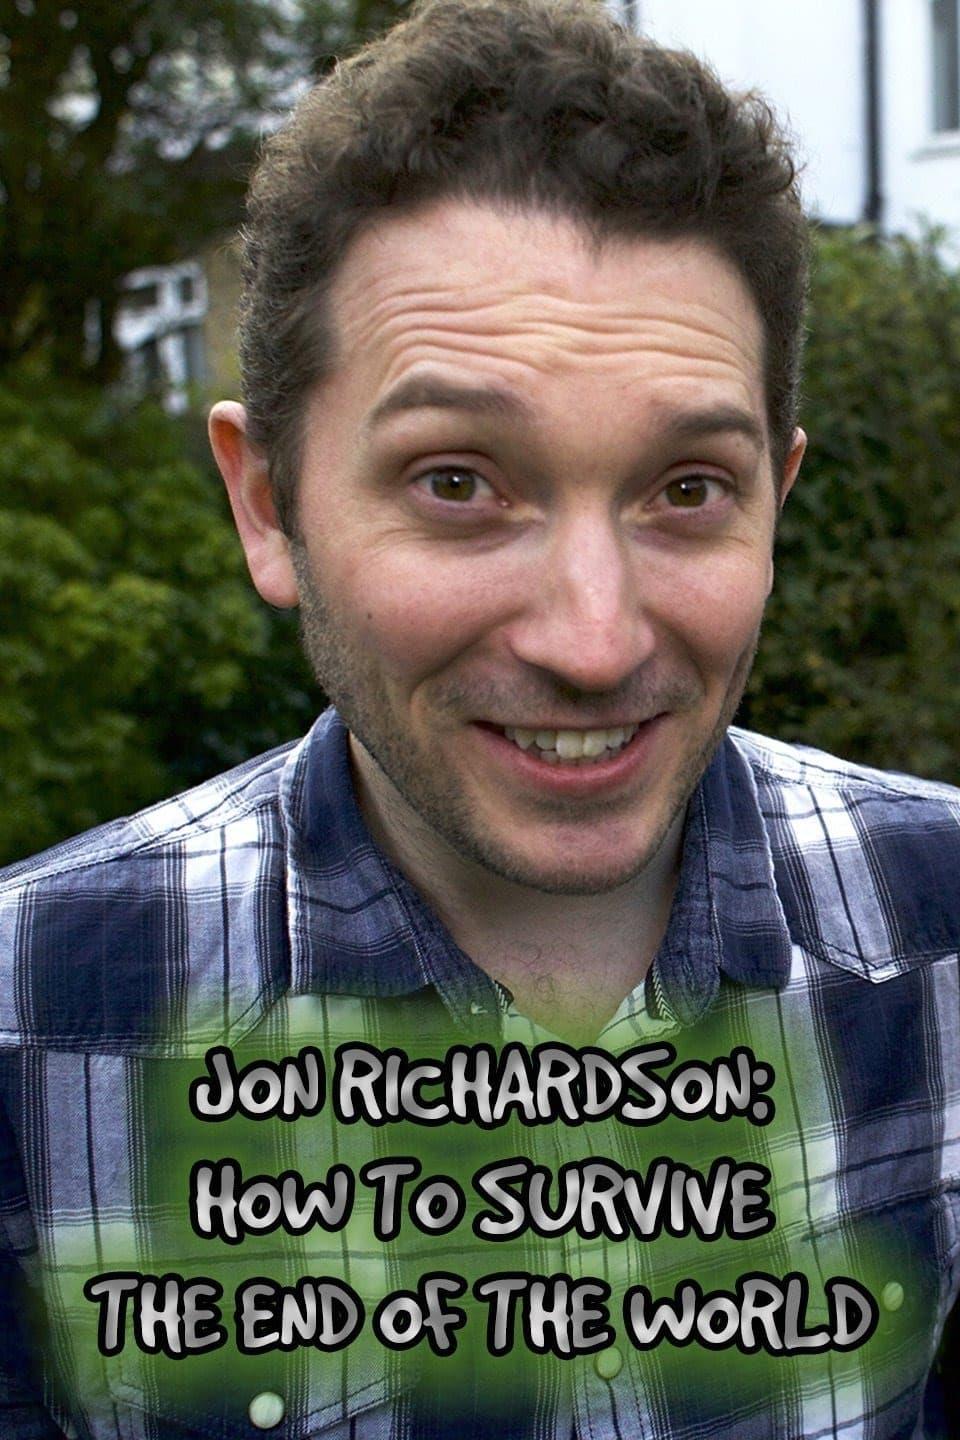 Jon Richardson: How to Survive The End of the World poster